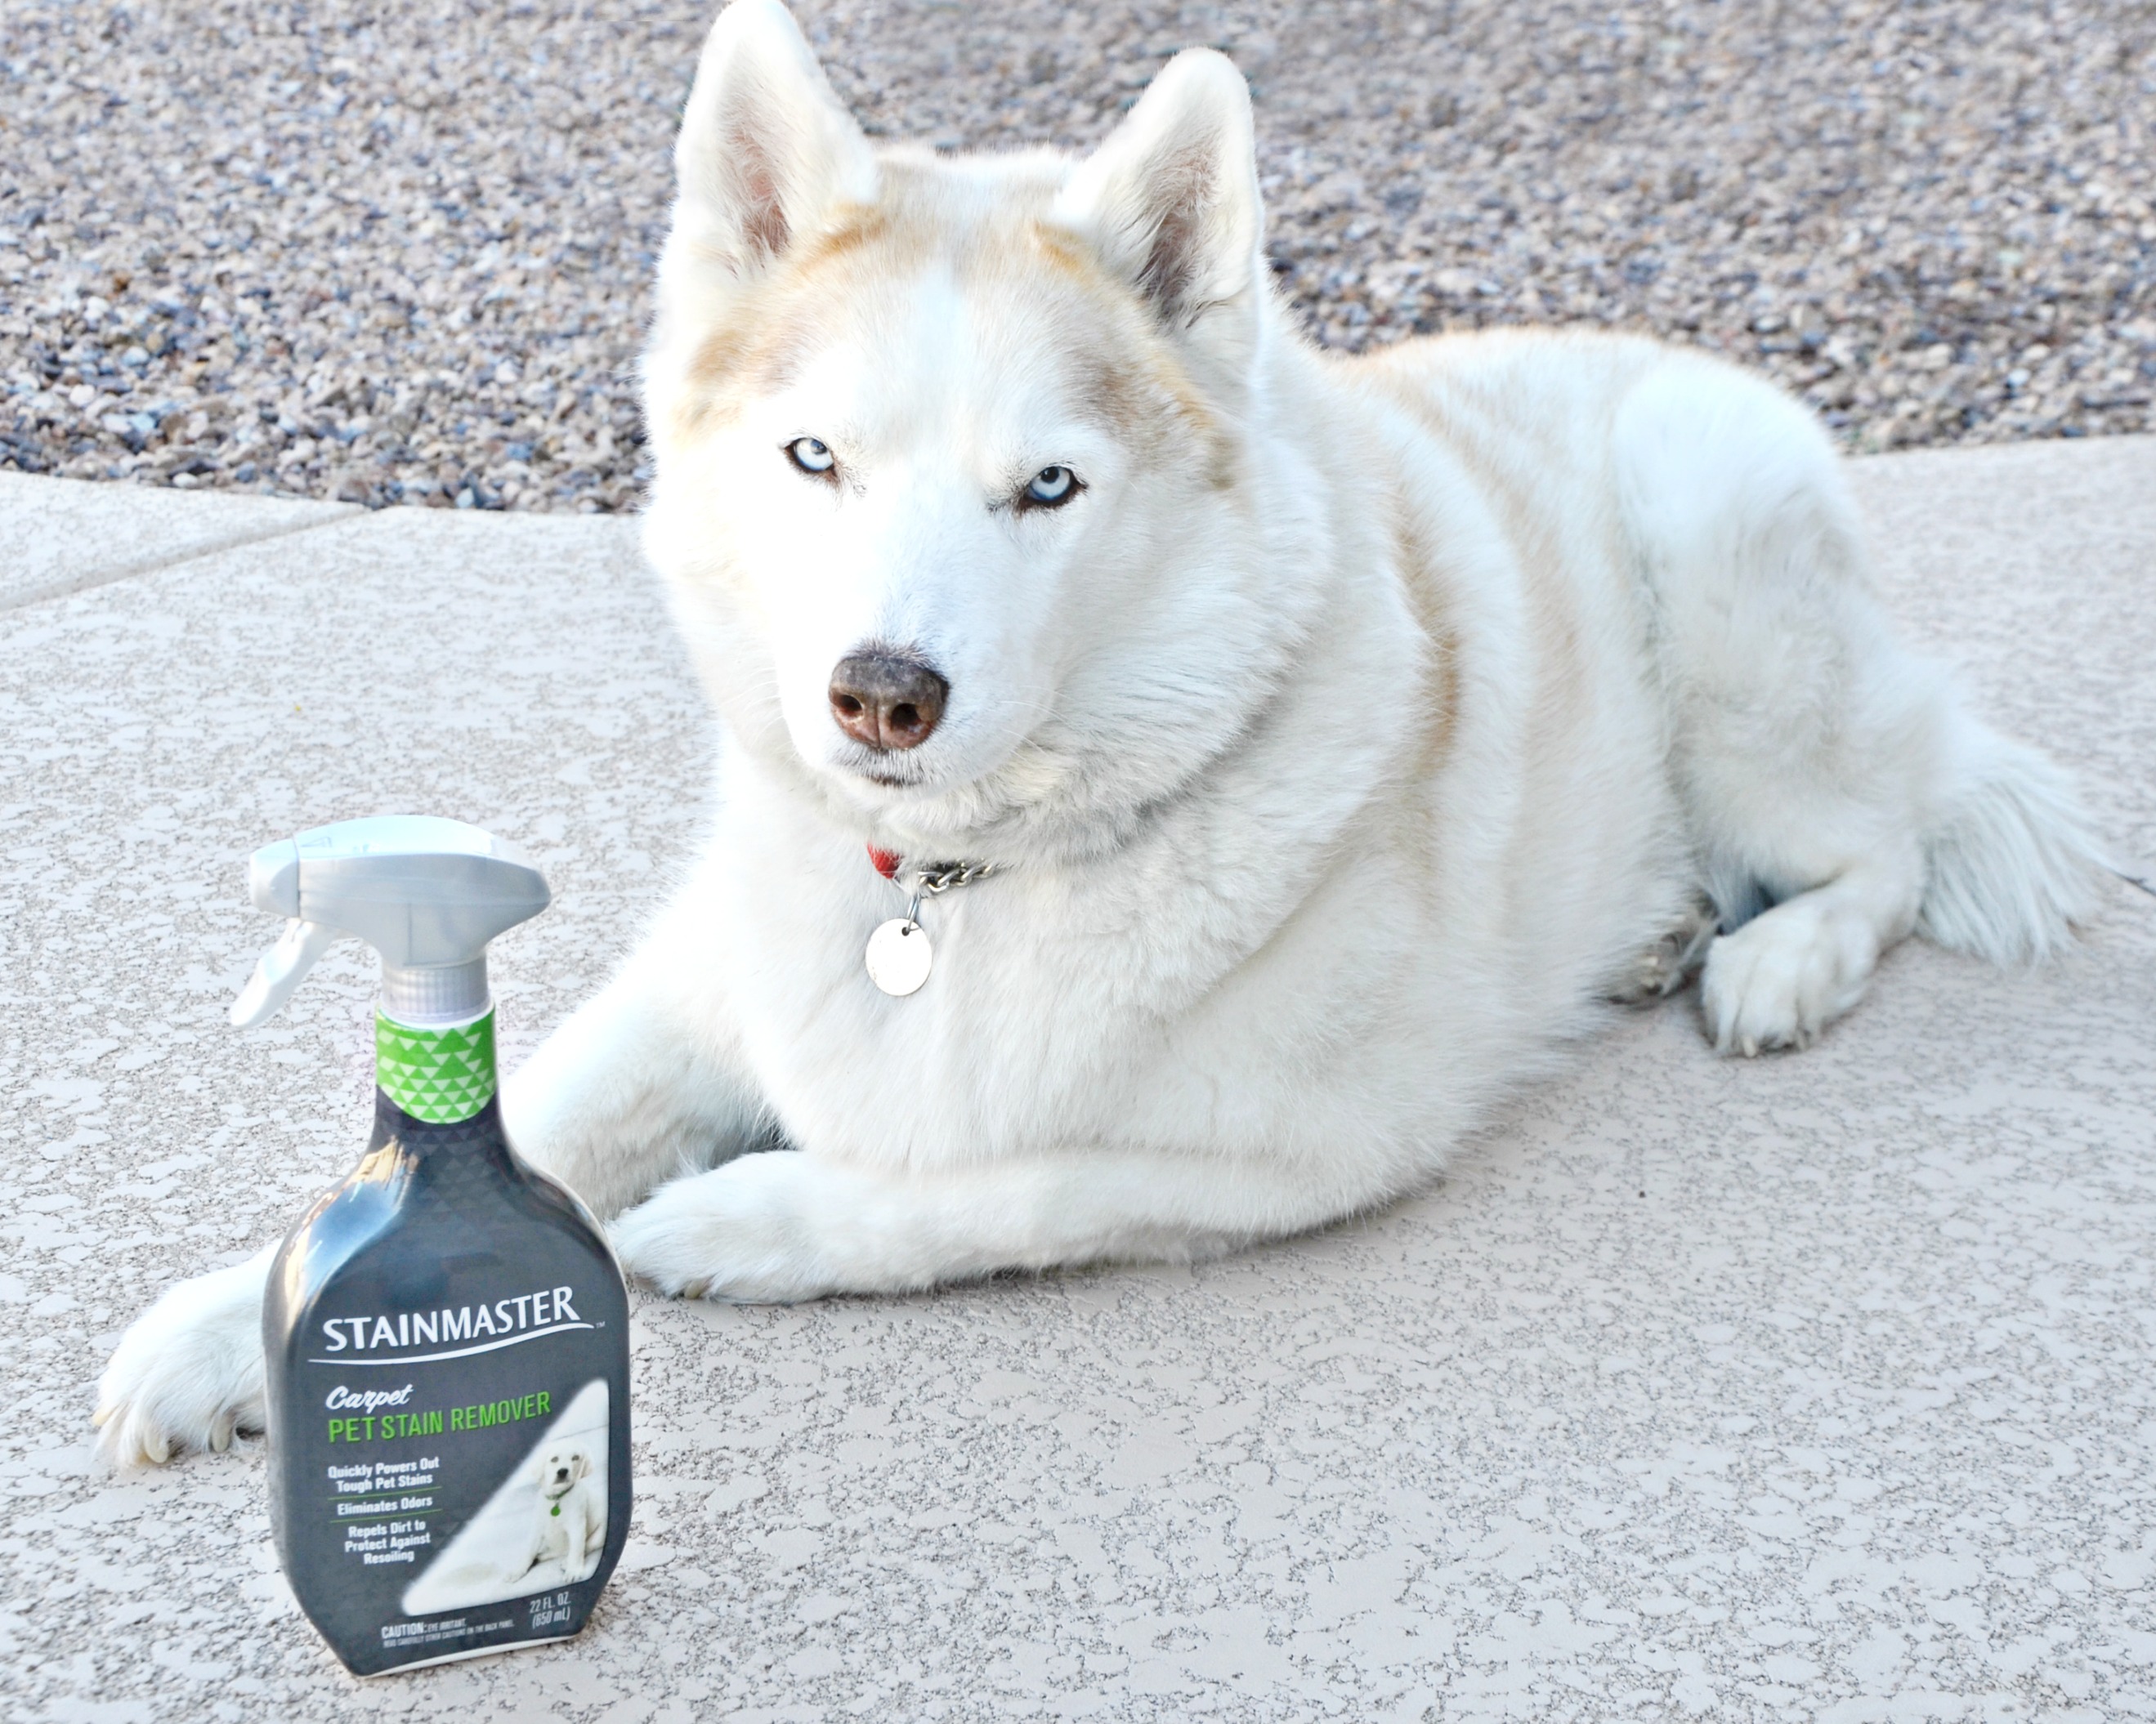 Share a new puppy husky gift with friends and family bringing home a new puppy husky! Our nine year old husky says STAINMASTER® is a great start!